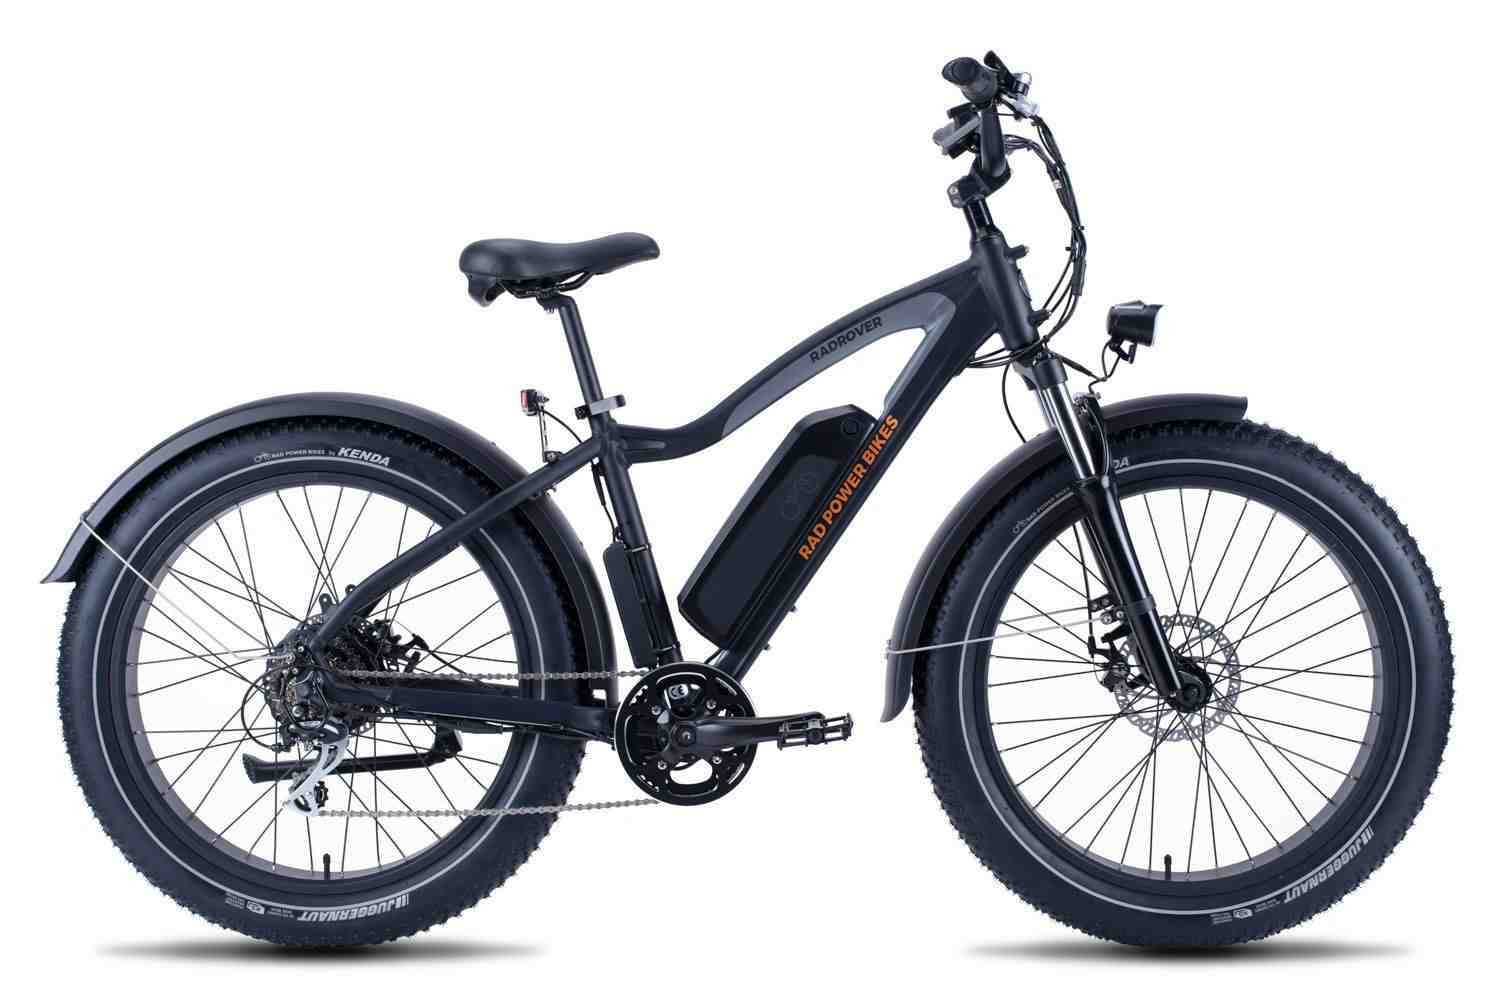 How long does an electric bike motor last?